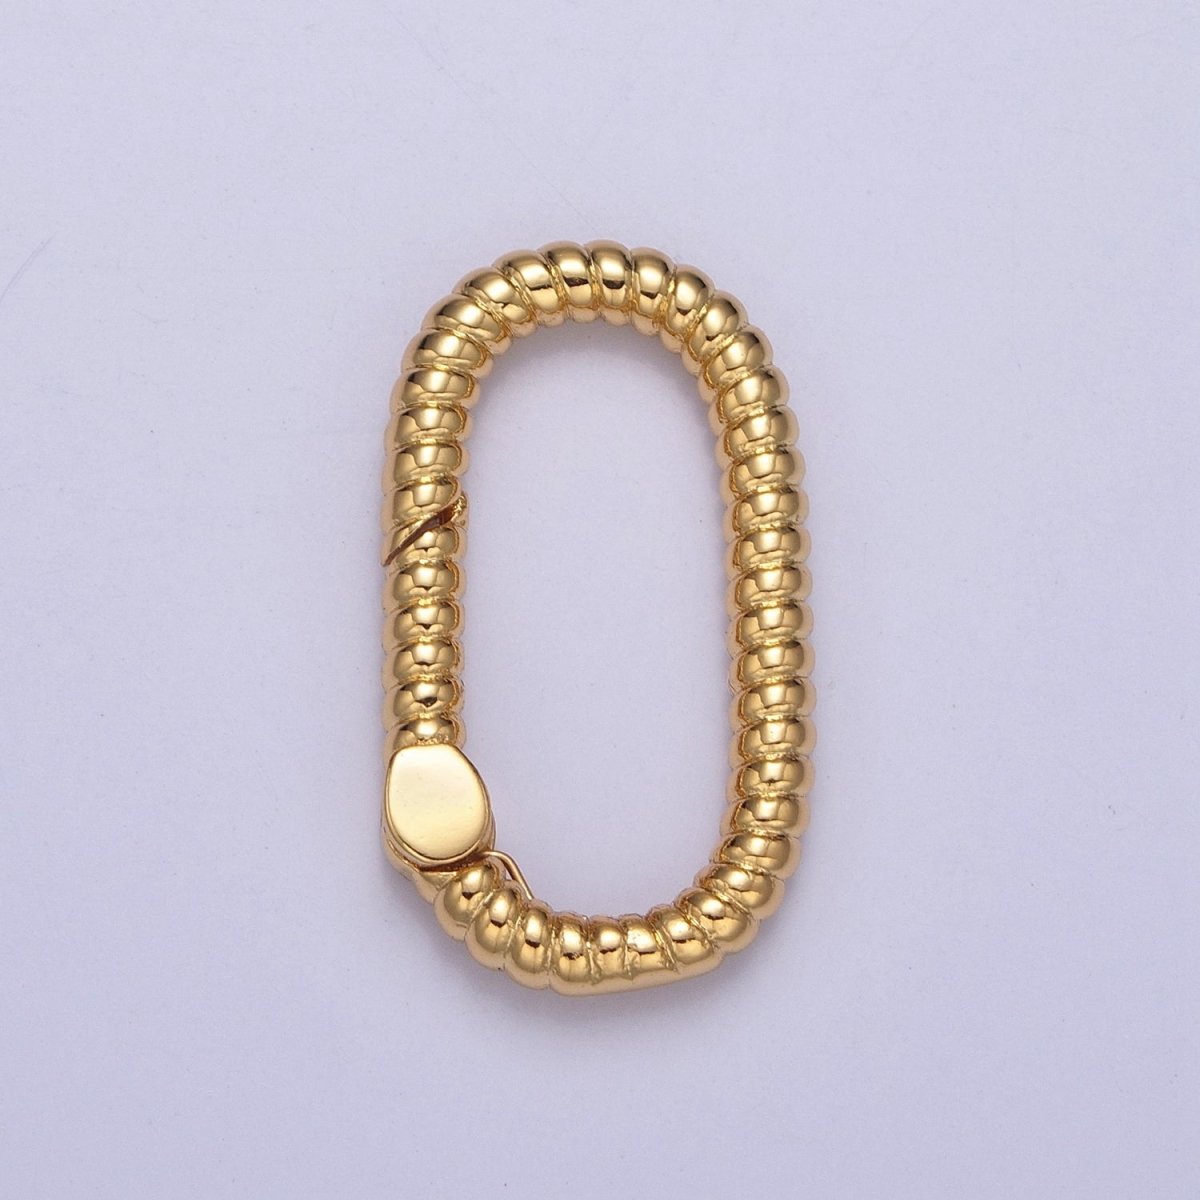 Dainty Gold Oval Spring Gate Ring, Push Gate Clasp Charm Holder 14K Gold Filled Clasp for Charm Holder Connector L-727 L-728 - DLUXCA